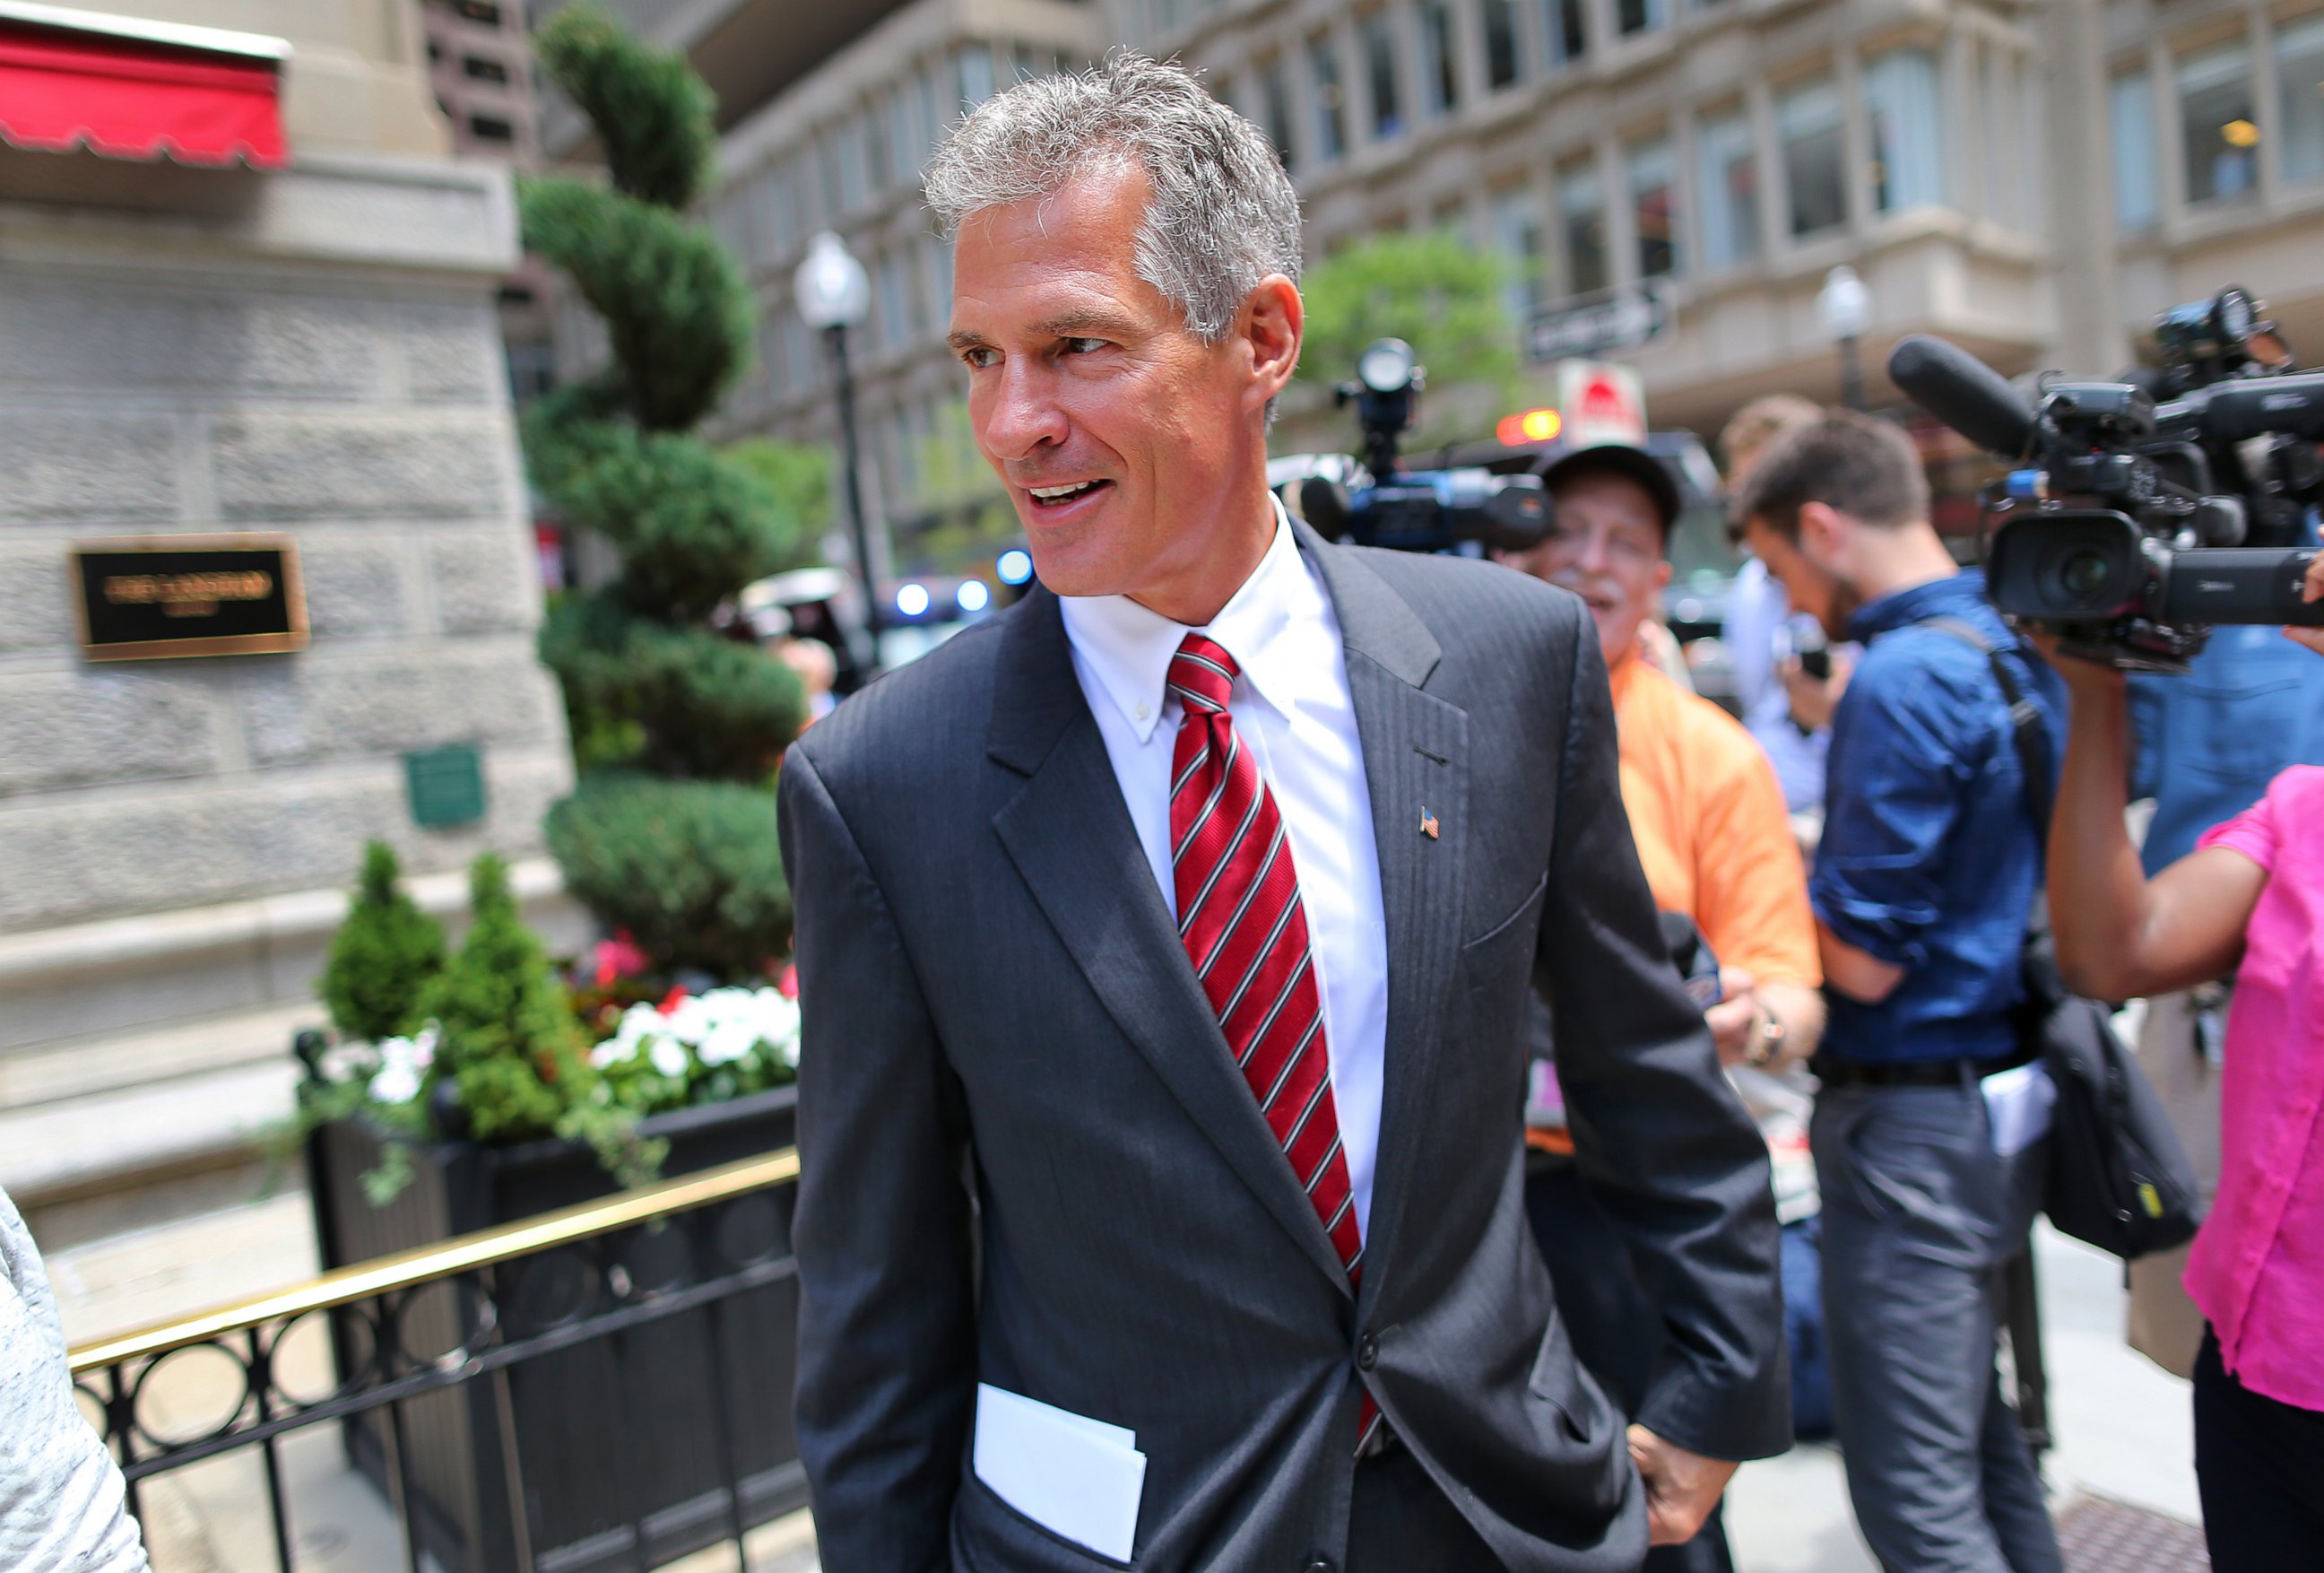 PHOTO: Former Senator Scott Brown leaves the Langham Hotel in Post Office Square where he attended a fundraising event for Republican presidential candidate Donald Trump in Boston, June 29, 2016.